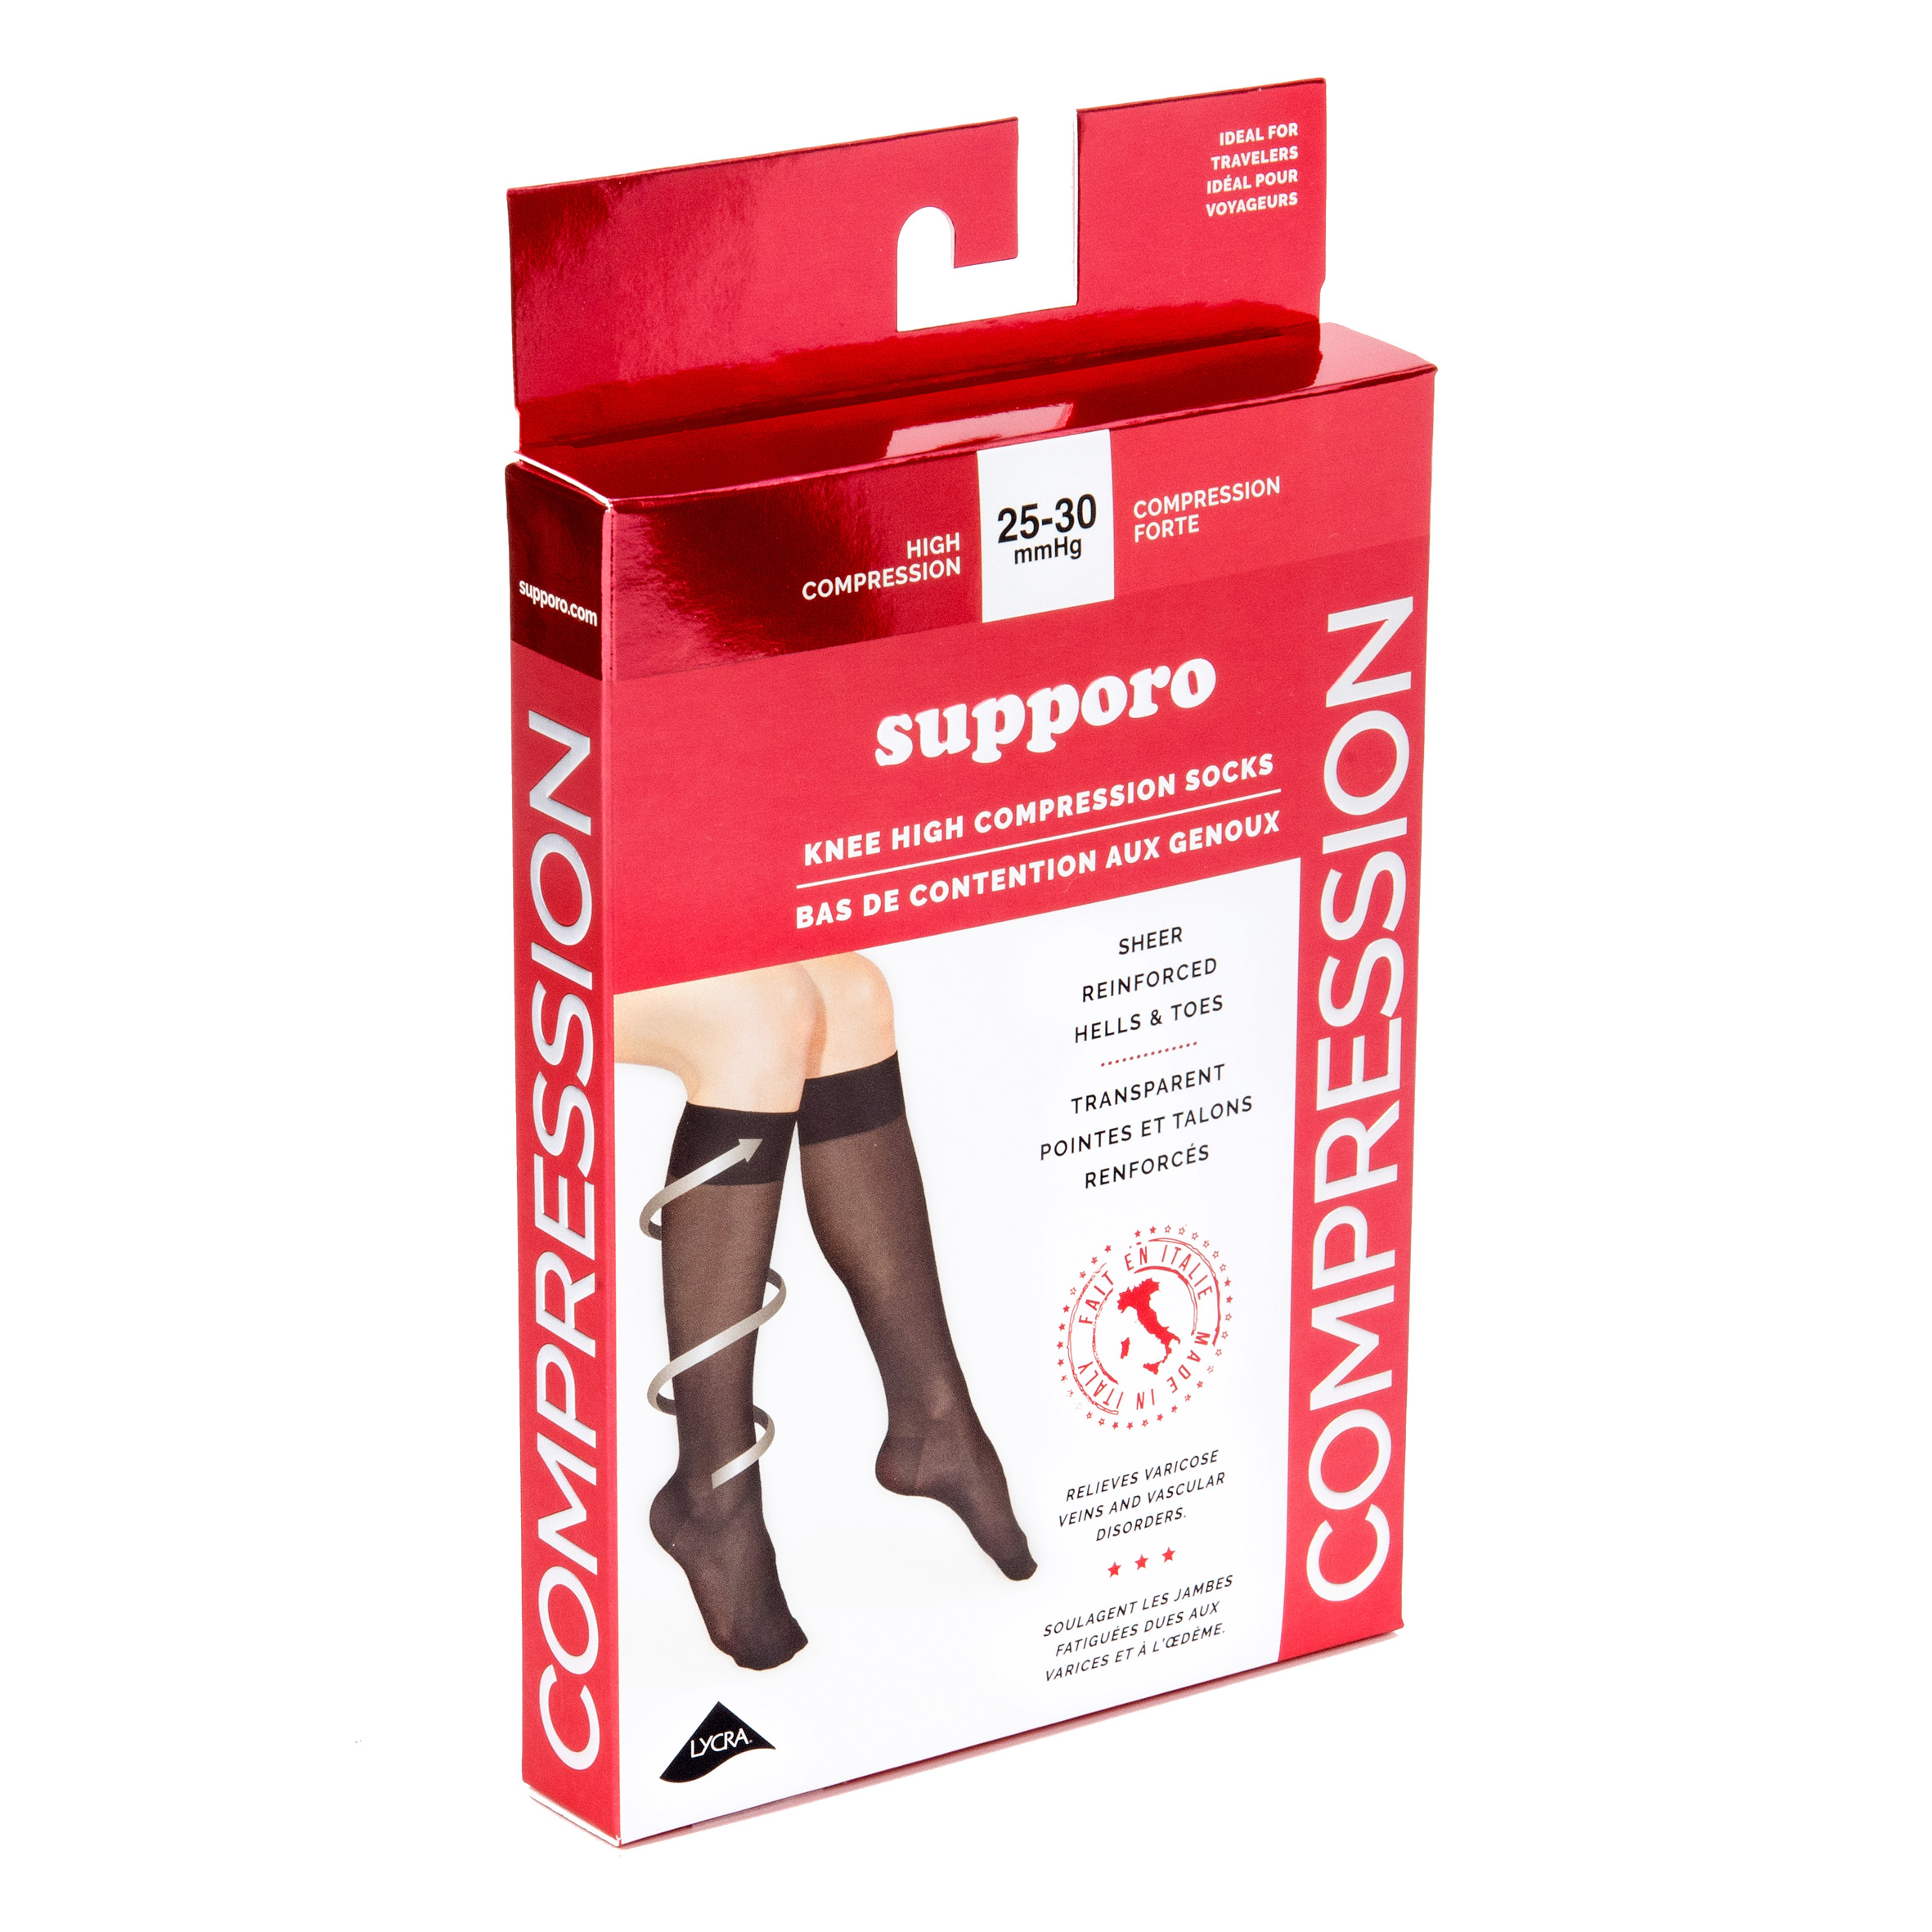 Supporo Sheer Compression Pantyhose, 6-8 mmHG